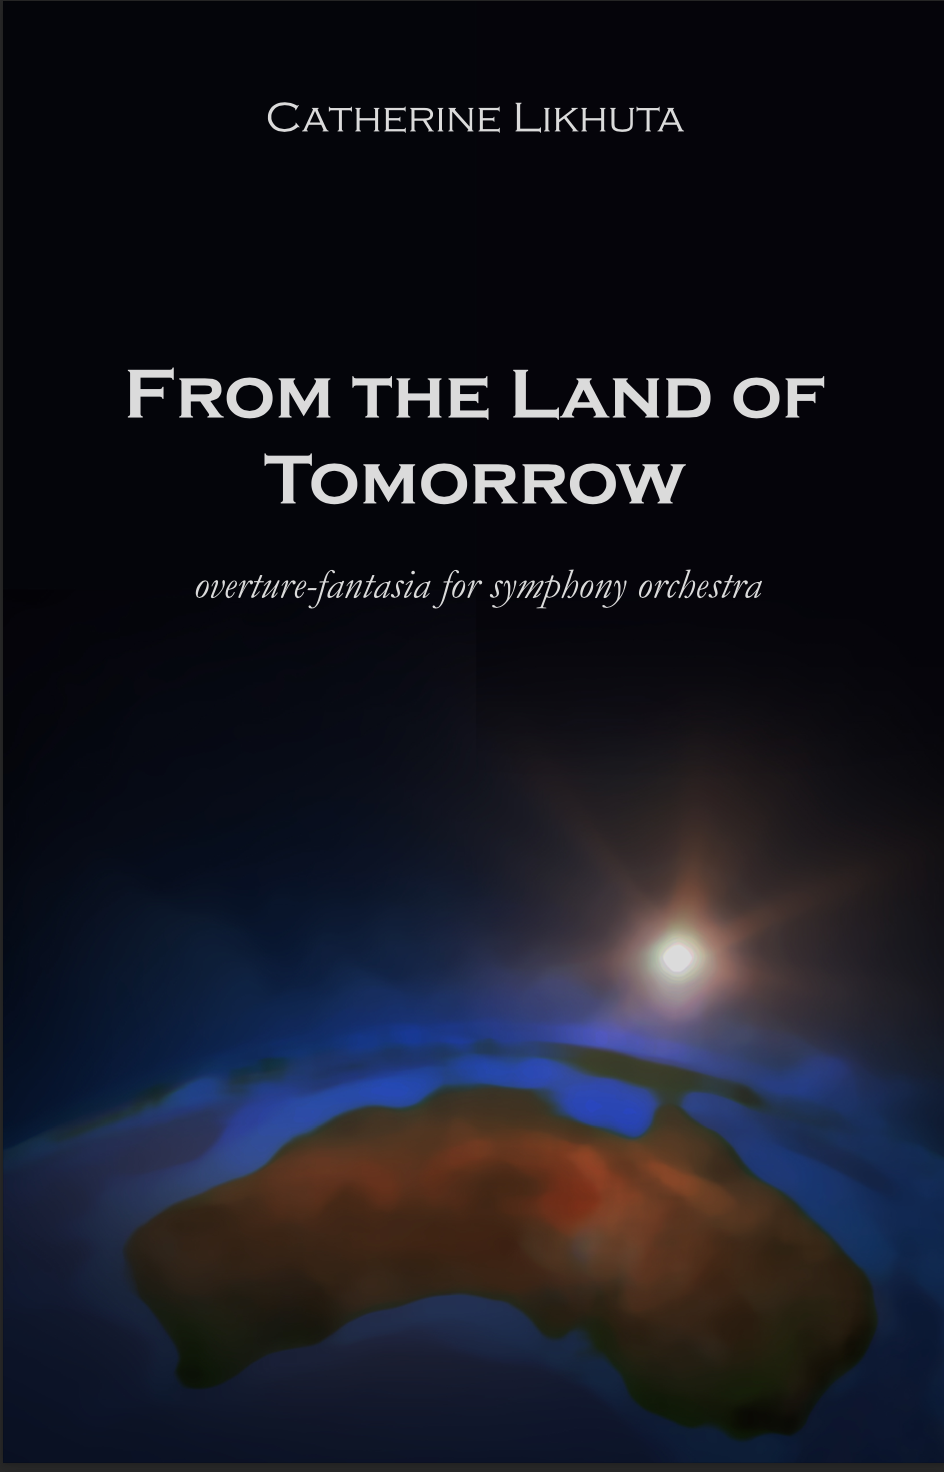 Land Of Tomorrow (Score Only) by Catherine Likhuta